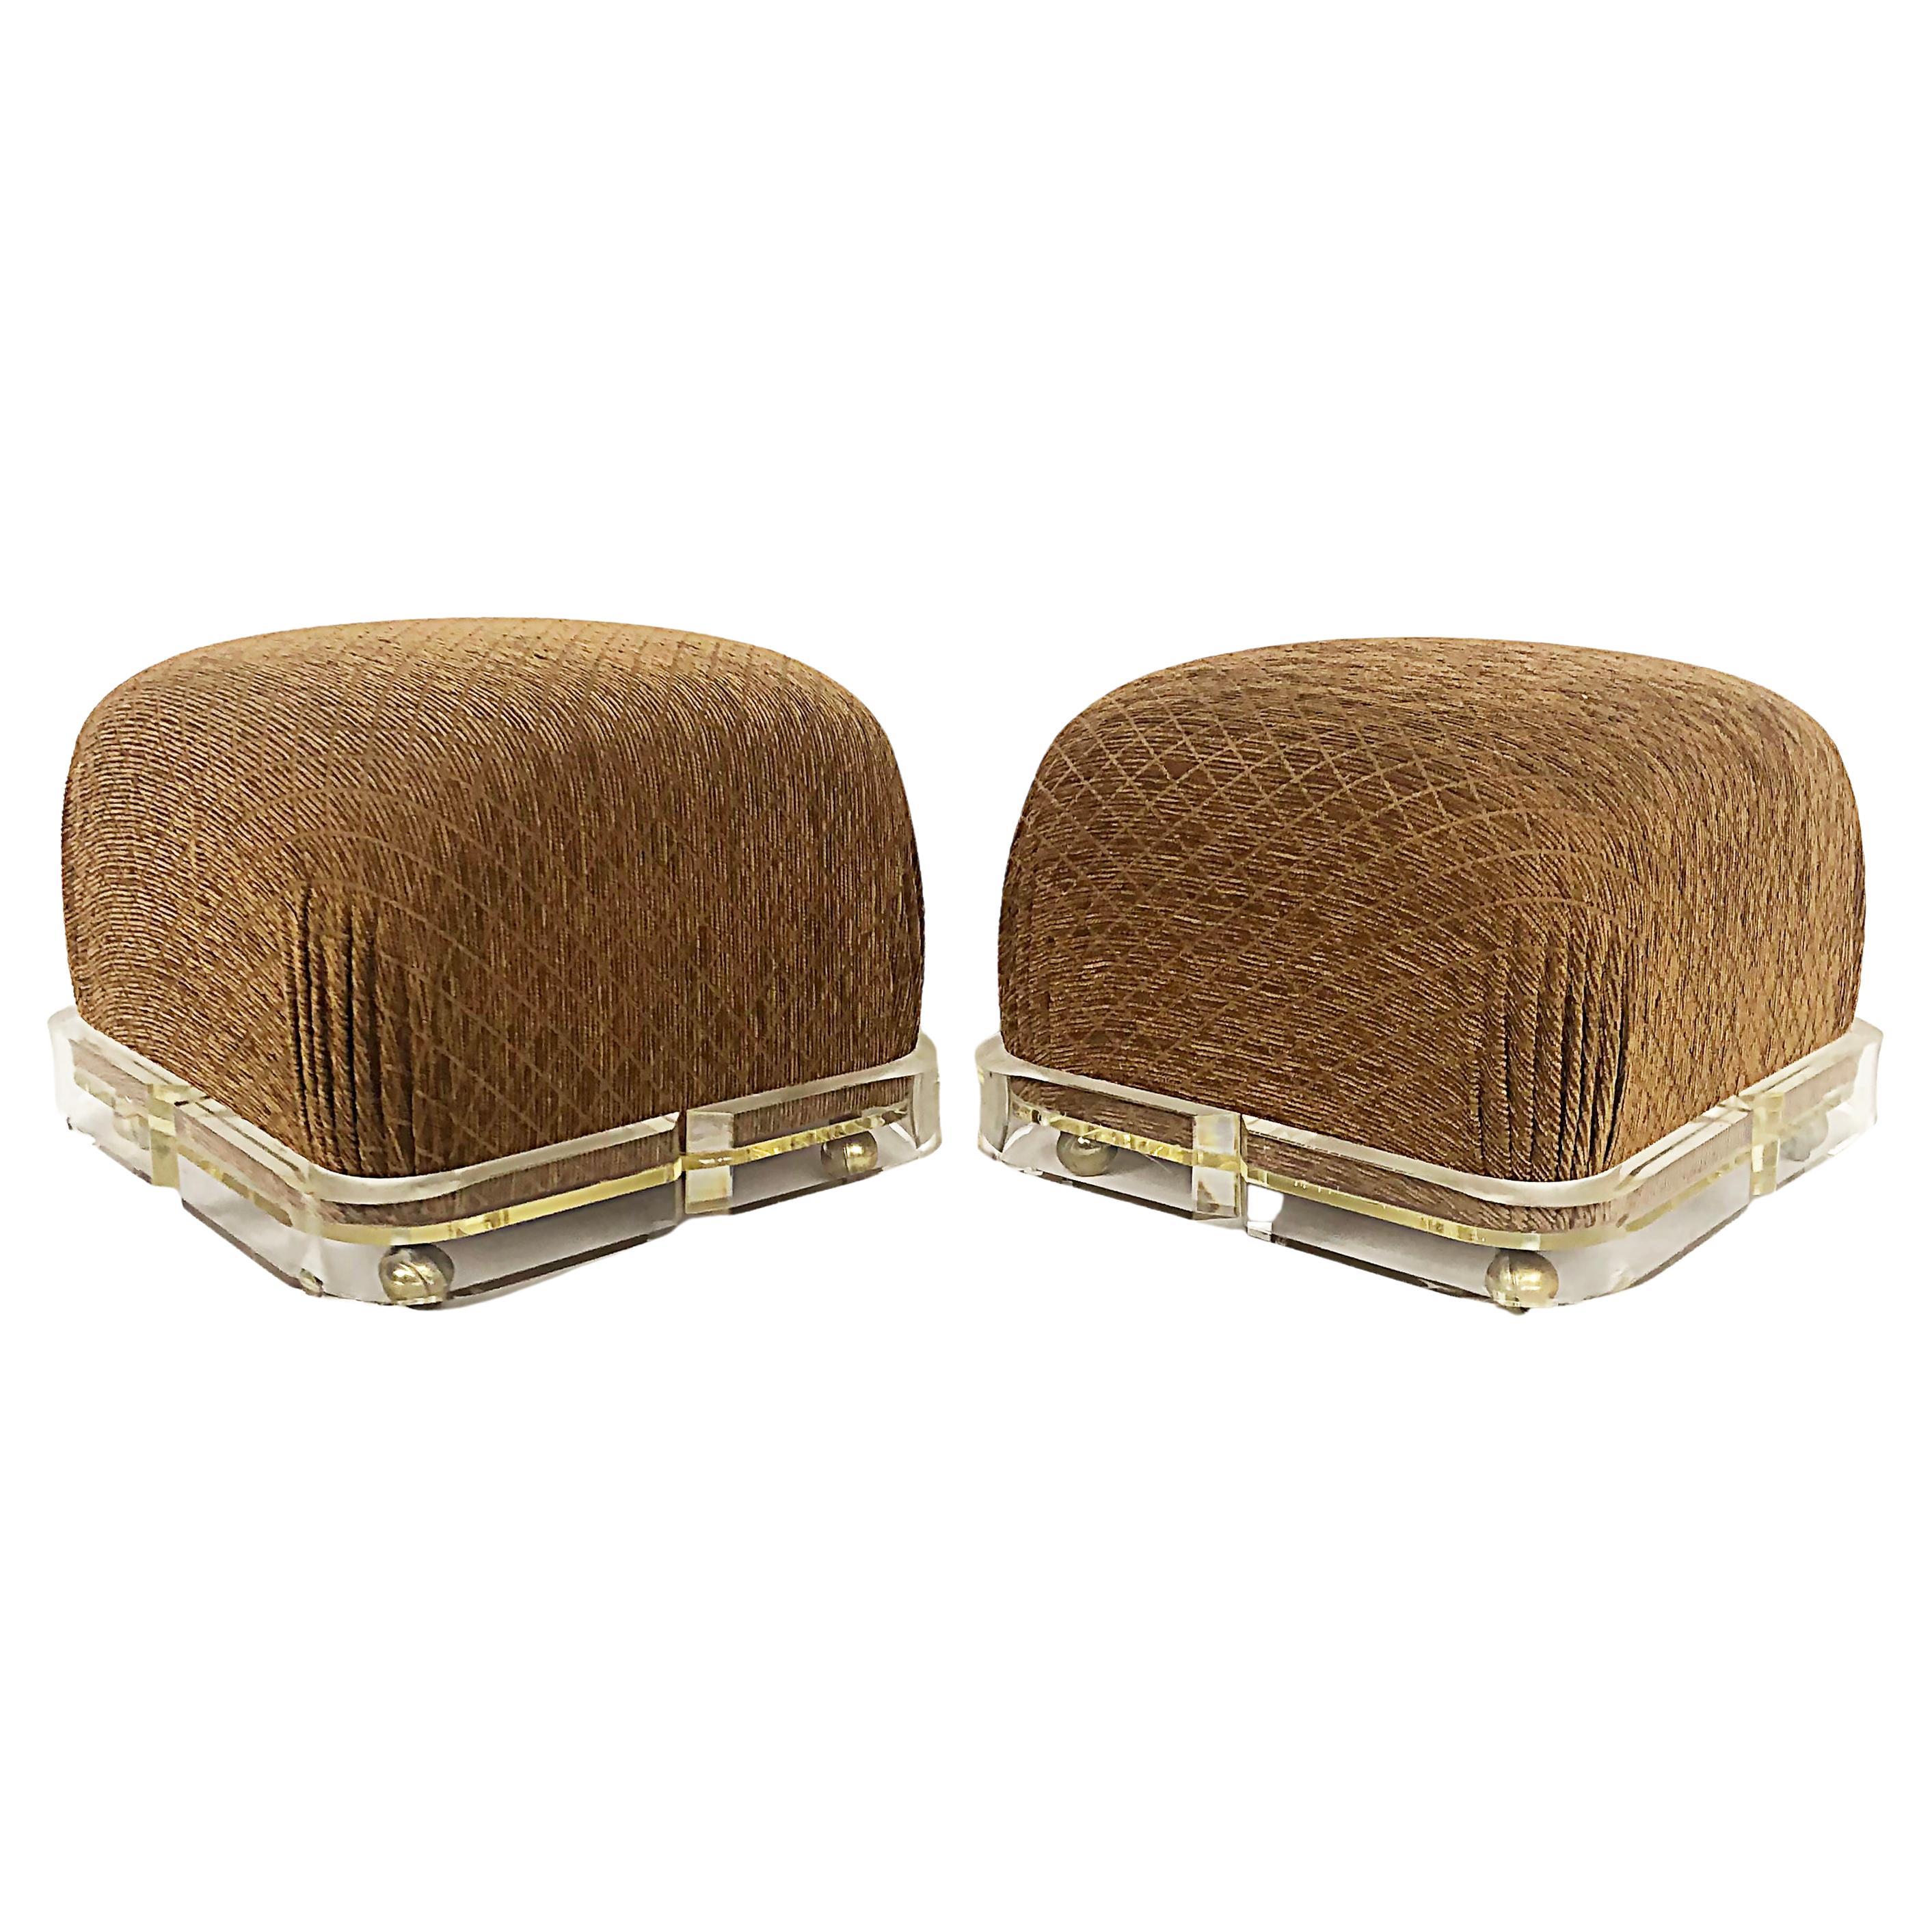 Karl Springer Upholstered Brass/ Lucite Ottoman Poufs, 1980s on Casters, a pair